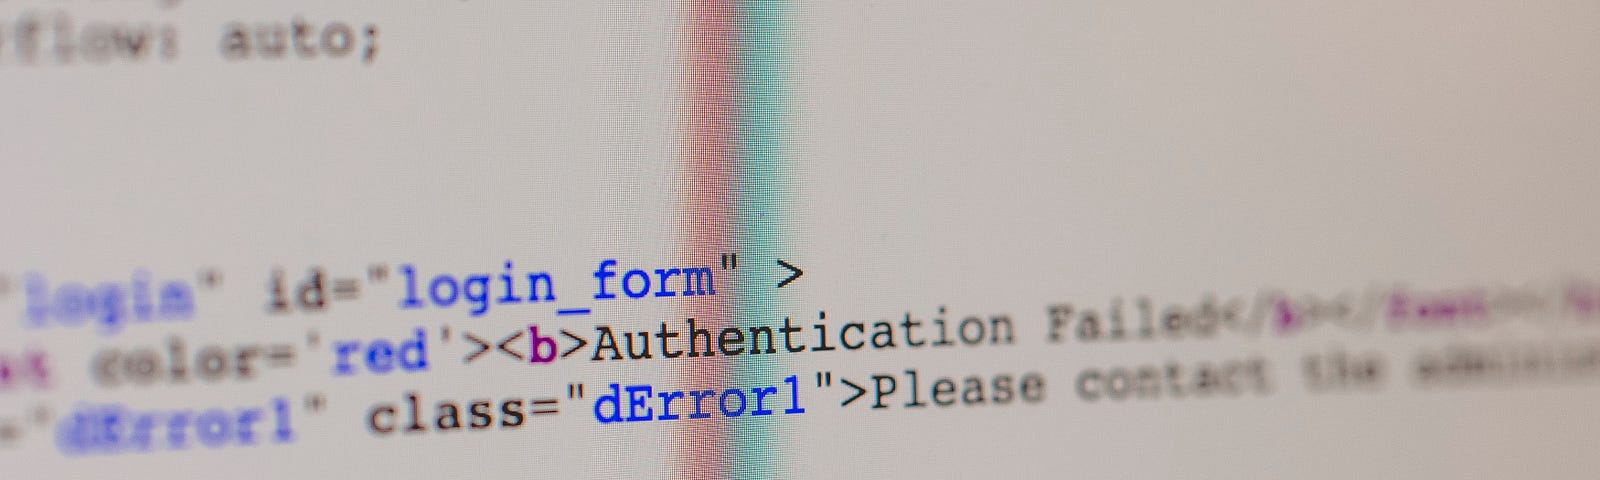 Code on a white monitor showing how an authentication error is handled in software